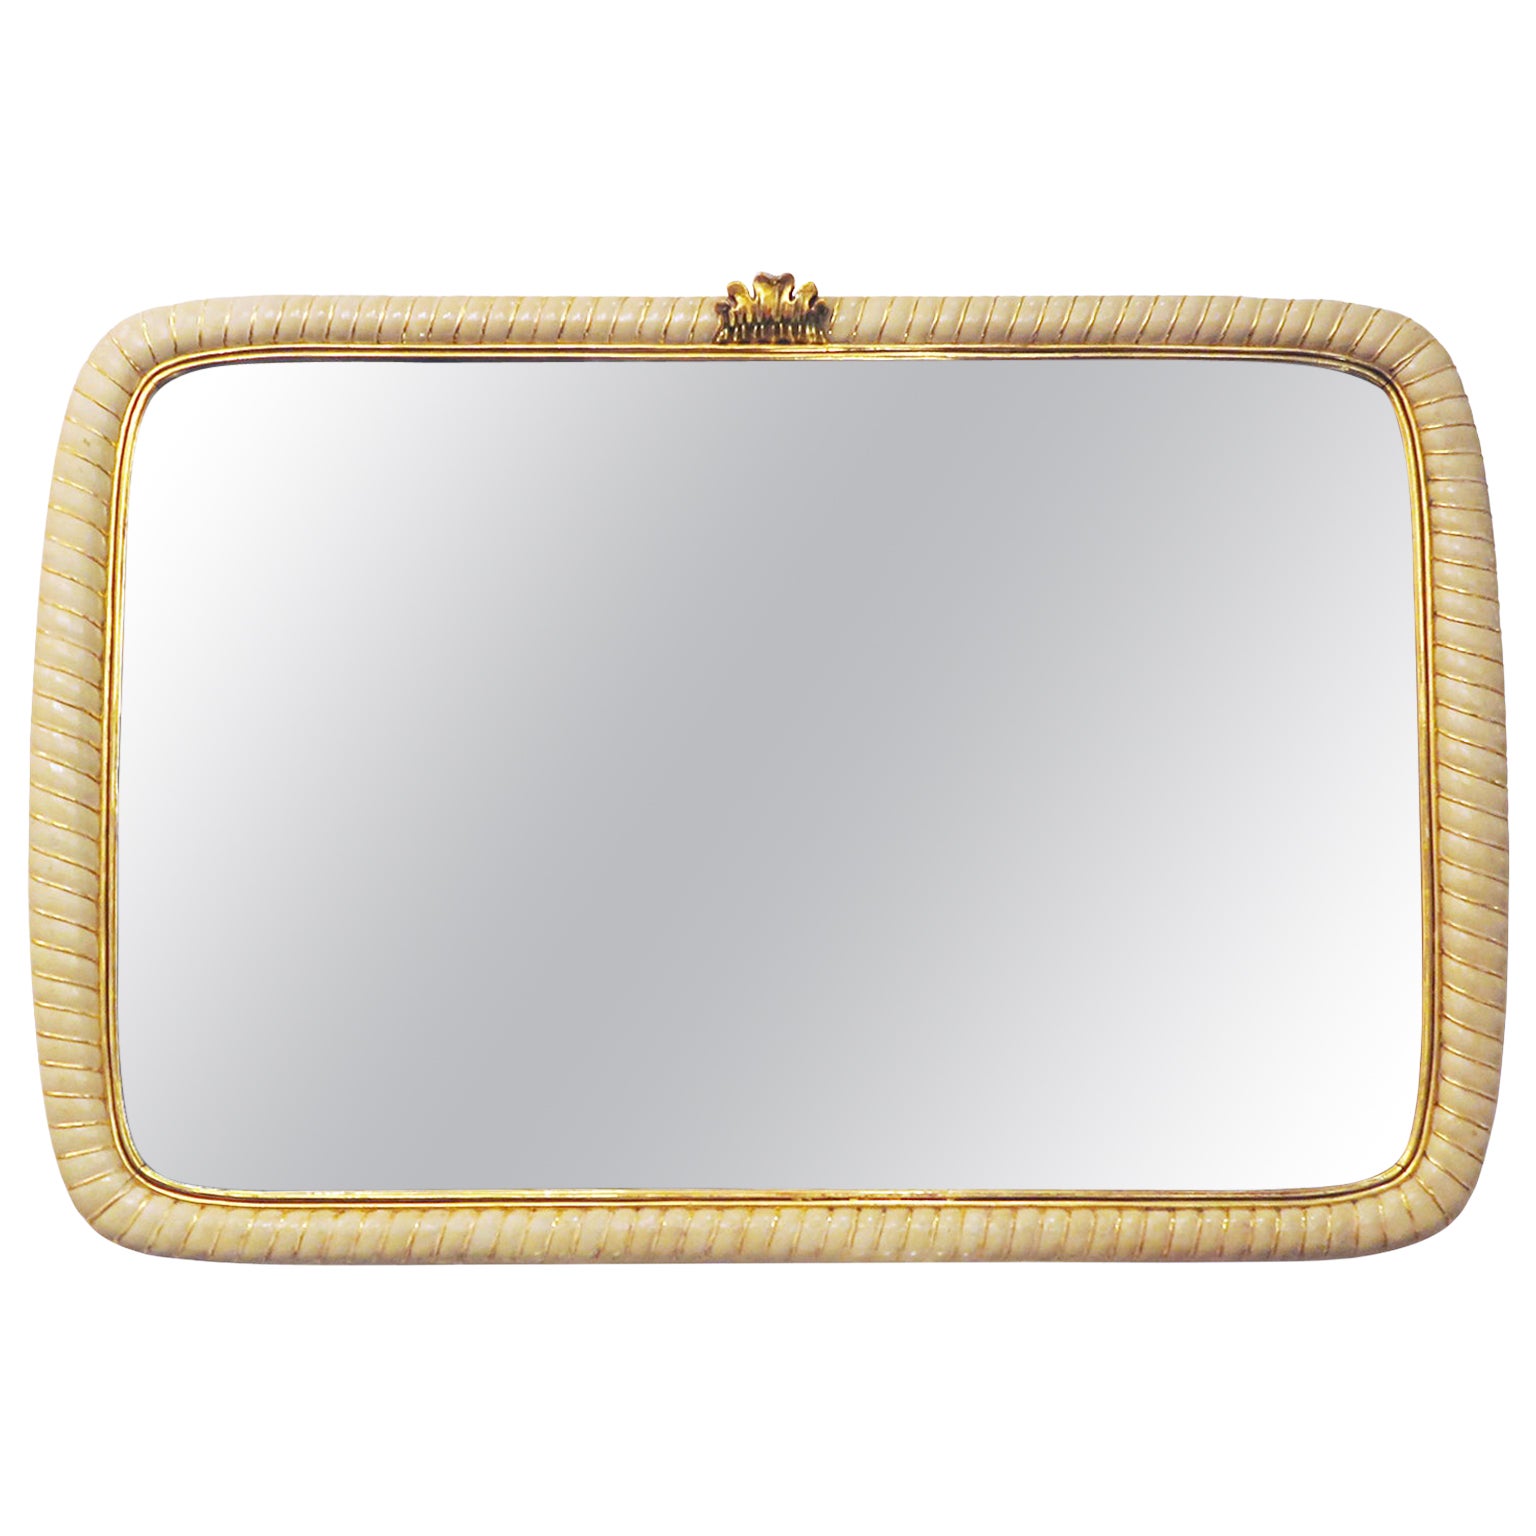 Italian Scalloped Mirror in Ivory Lacquer and Gold Leaf